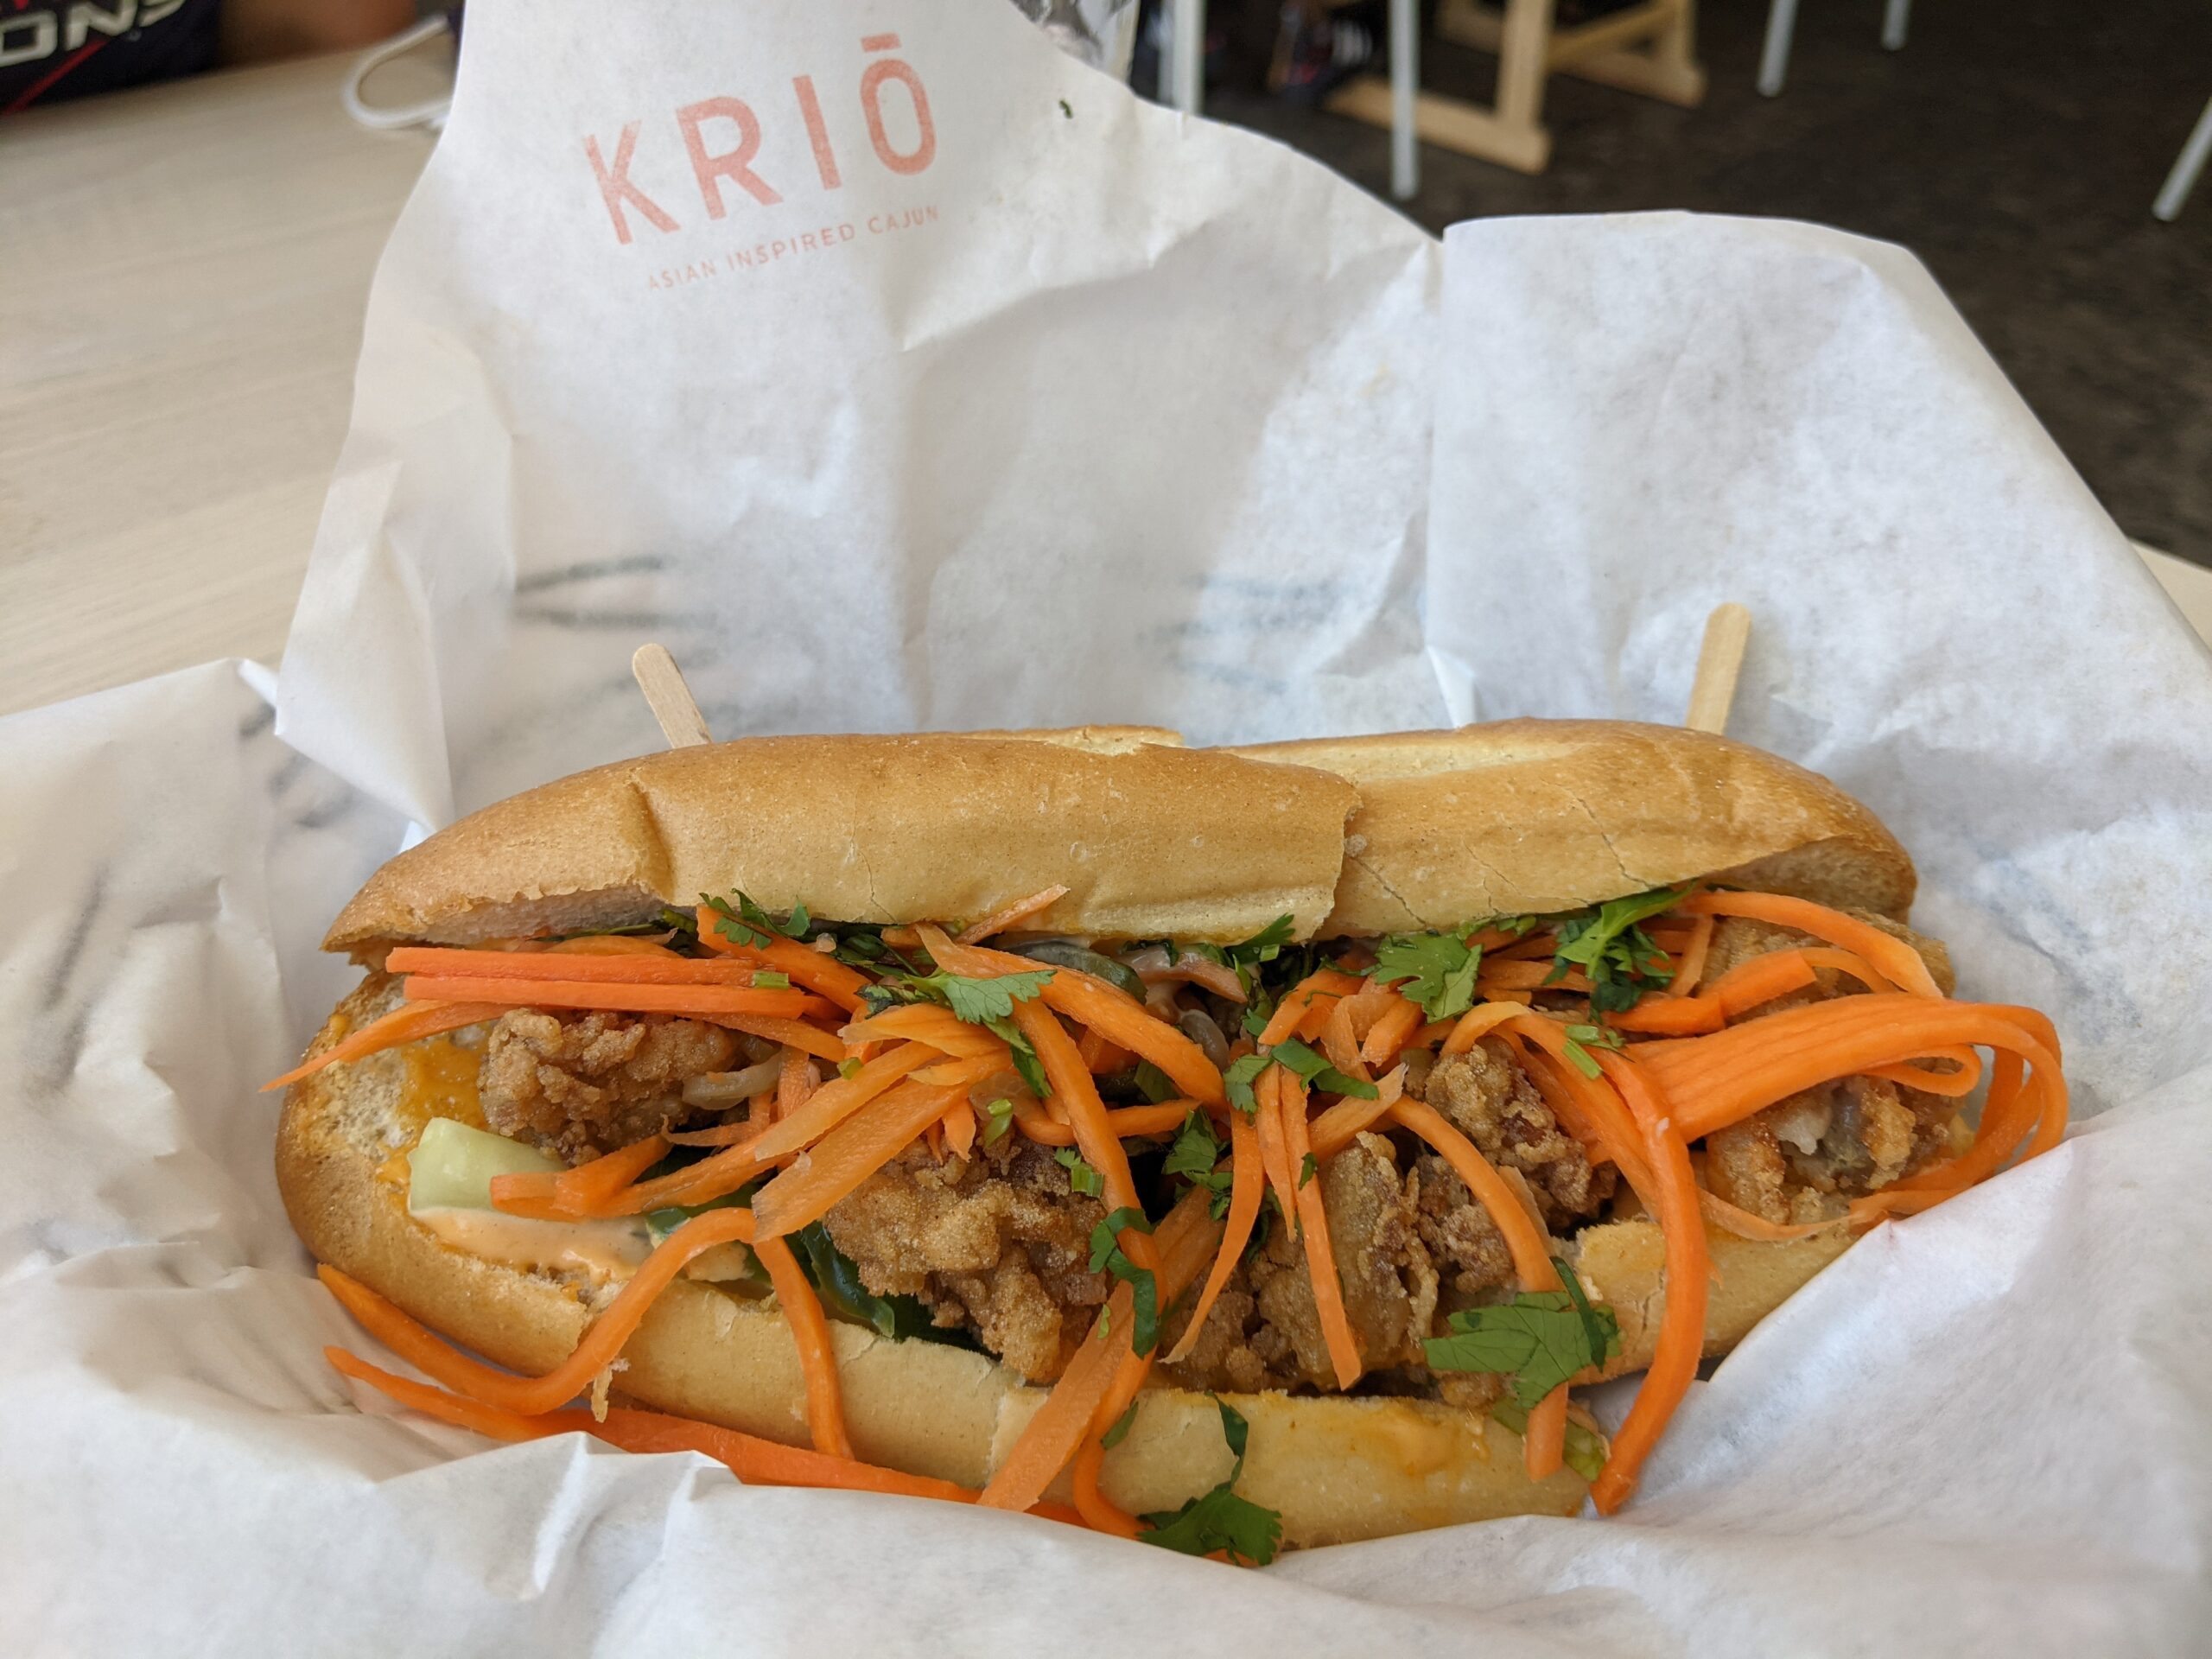 Photo of a sandwich from Krio in Bishop Arts.